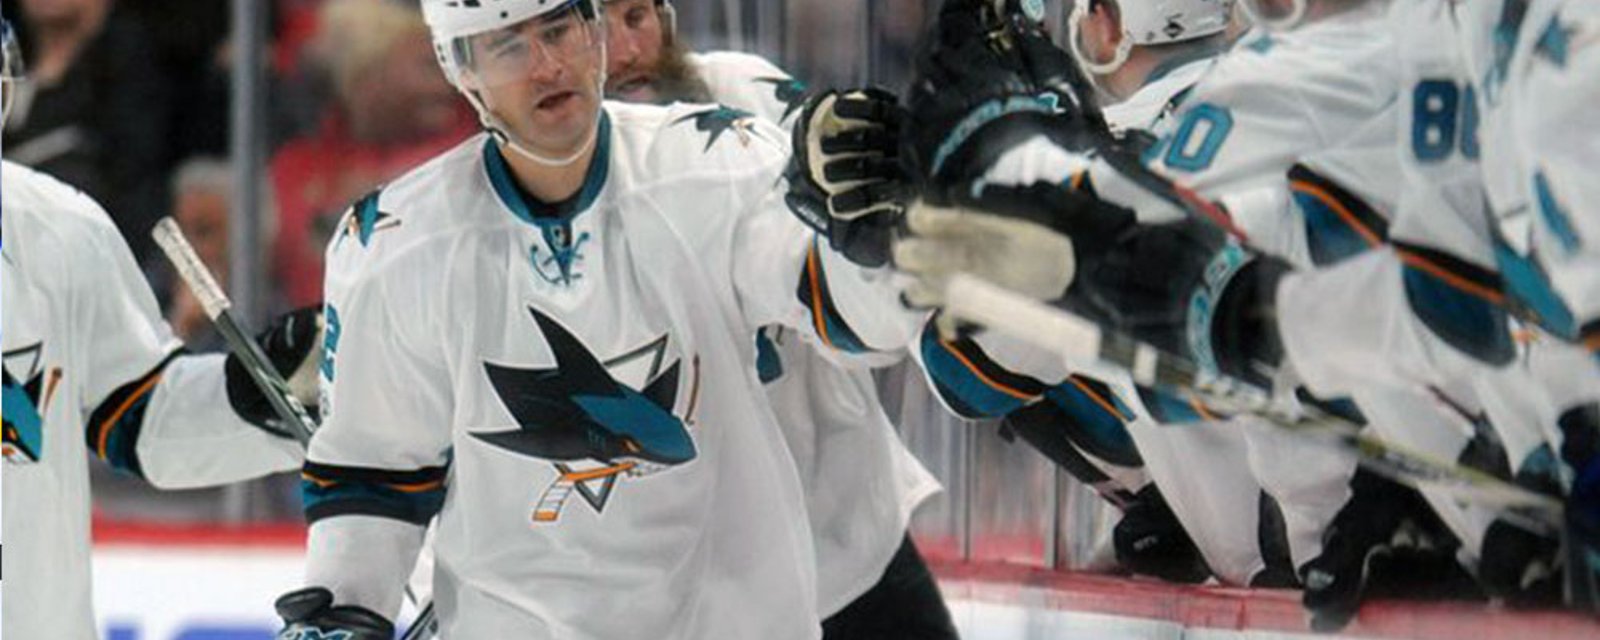 Marleau scores two goals in his return to Sharks